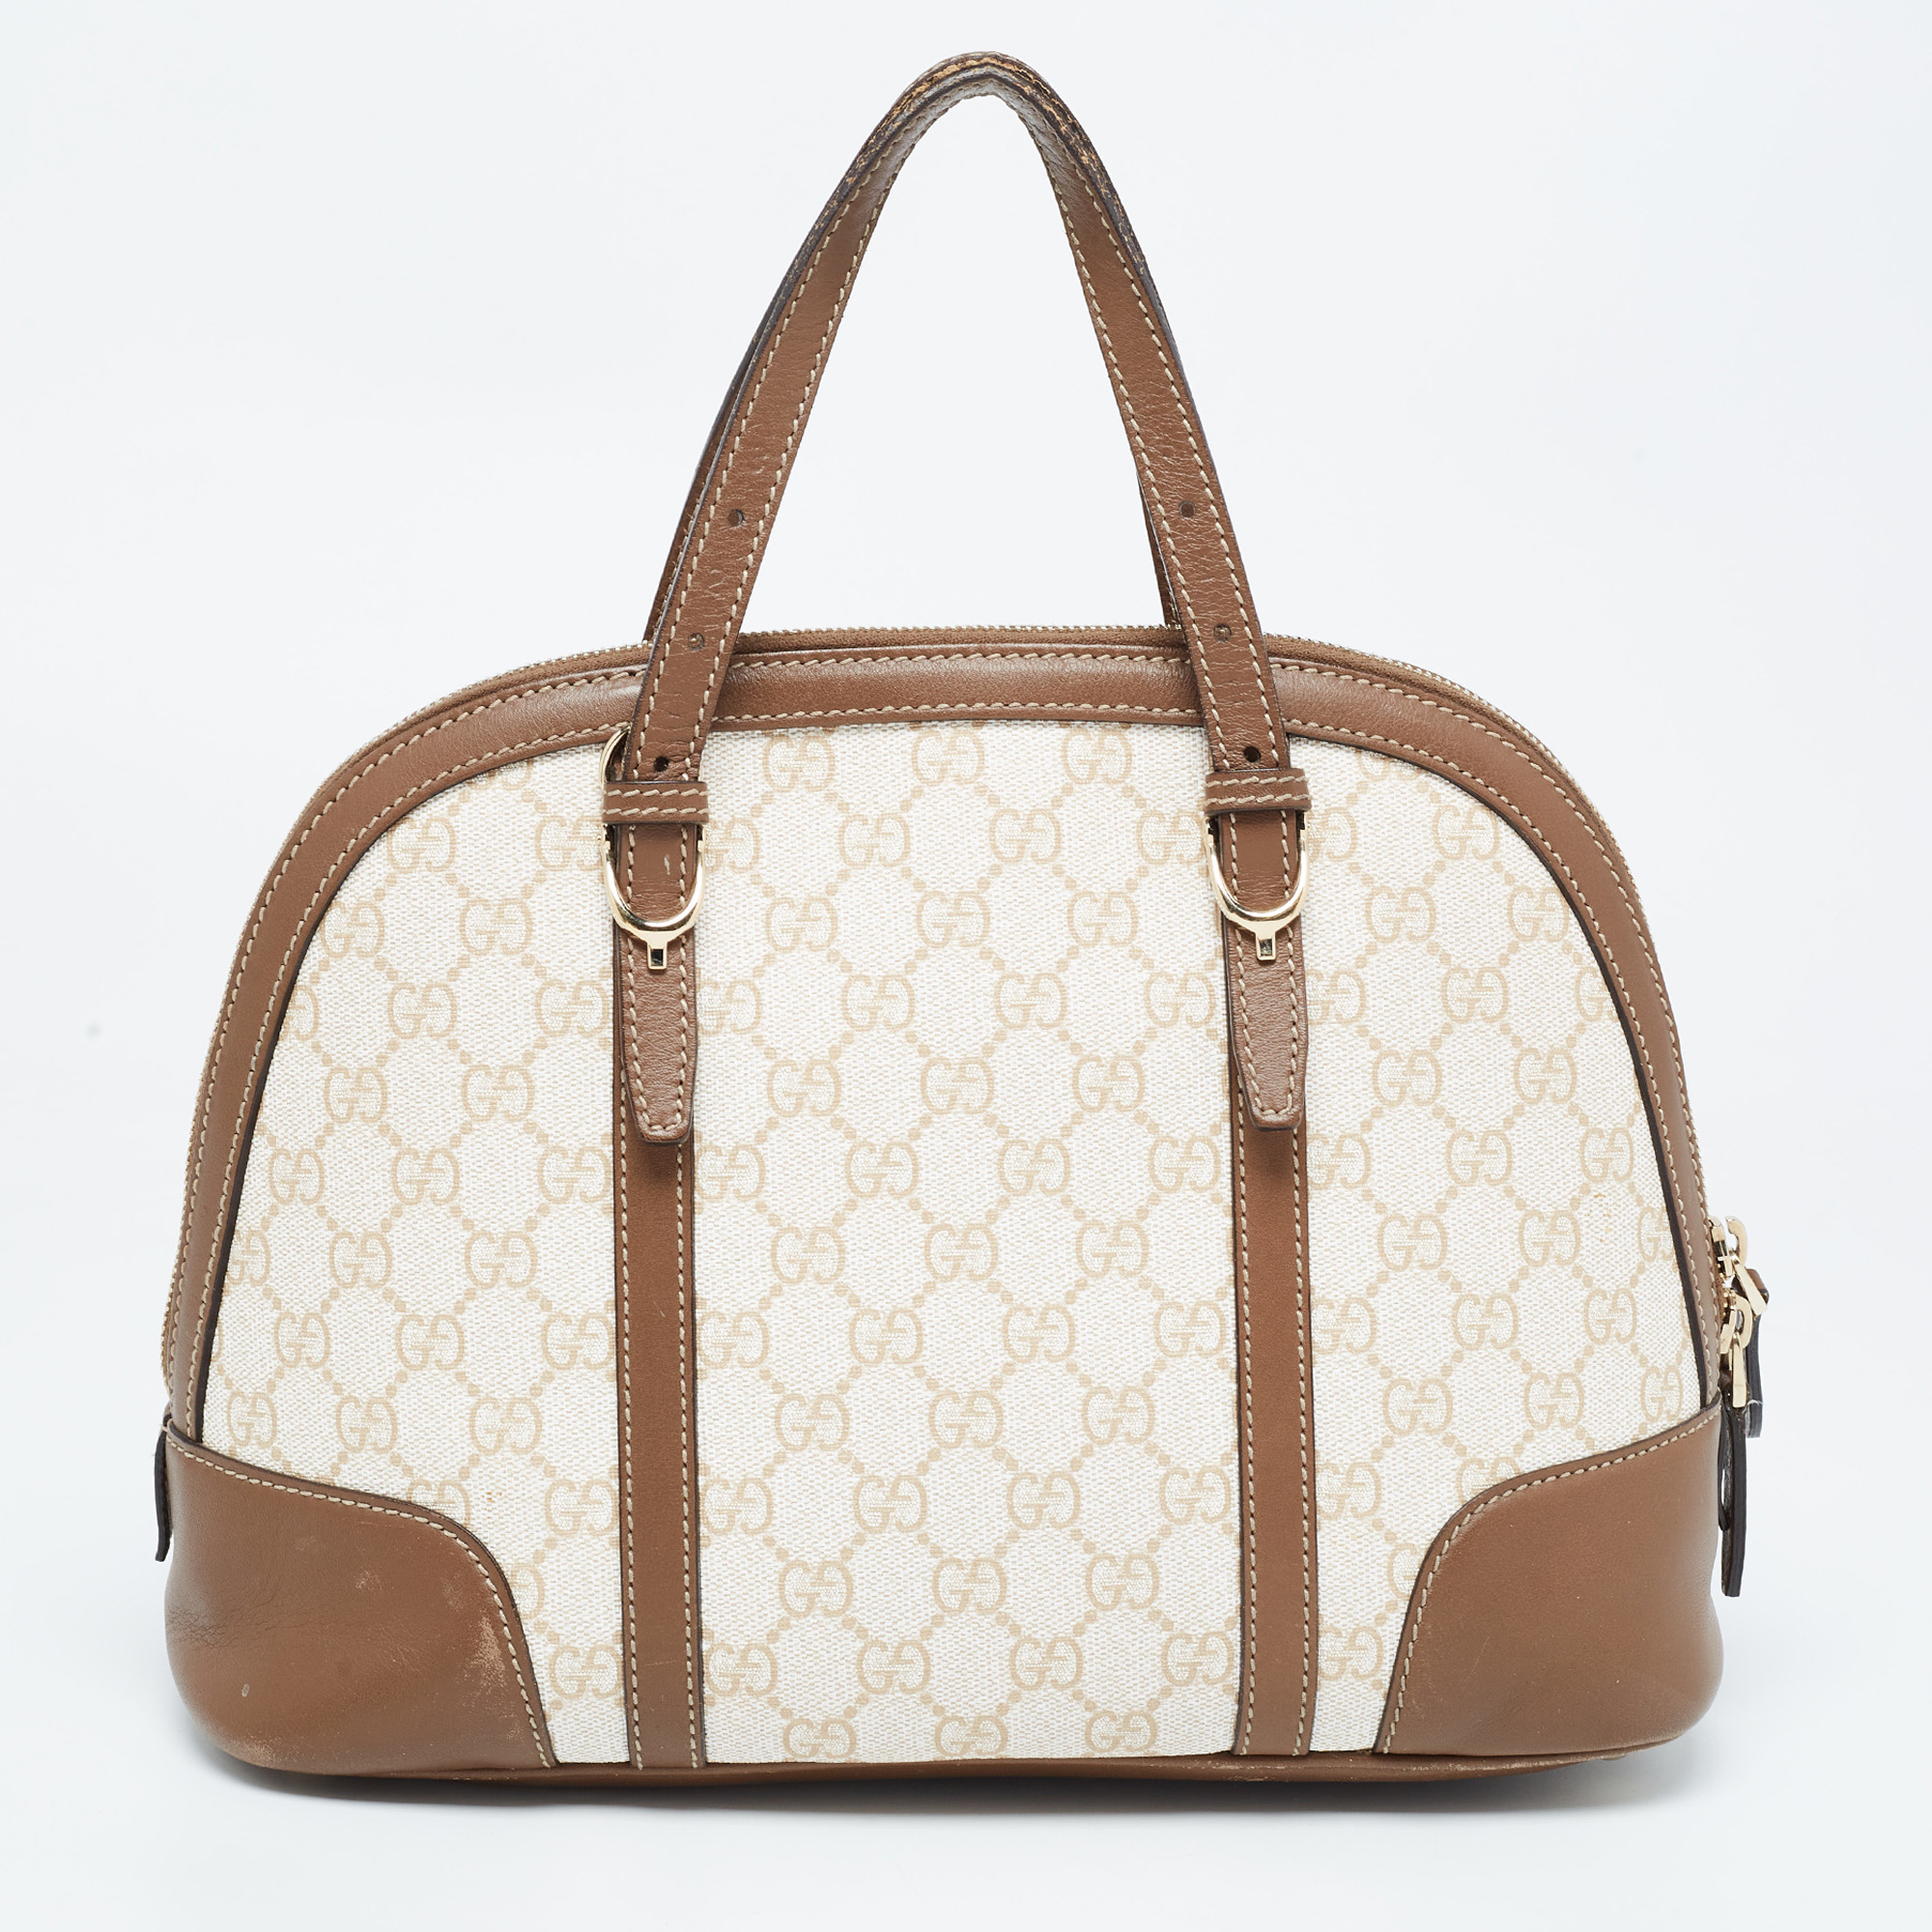 Gucci Brown/Beige GG Supreme Canvas And Leather Nice Dome Satchel